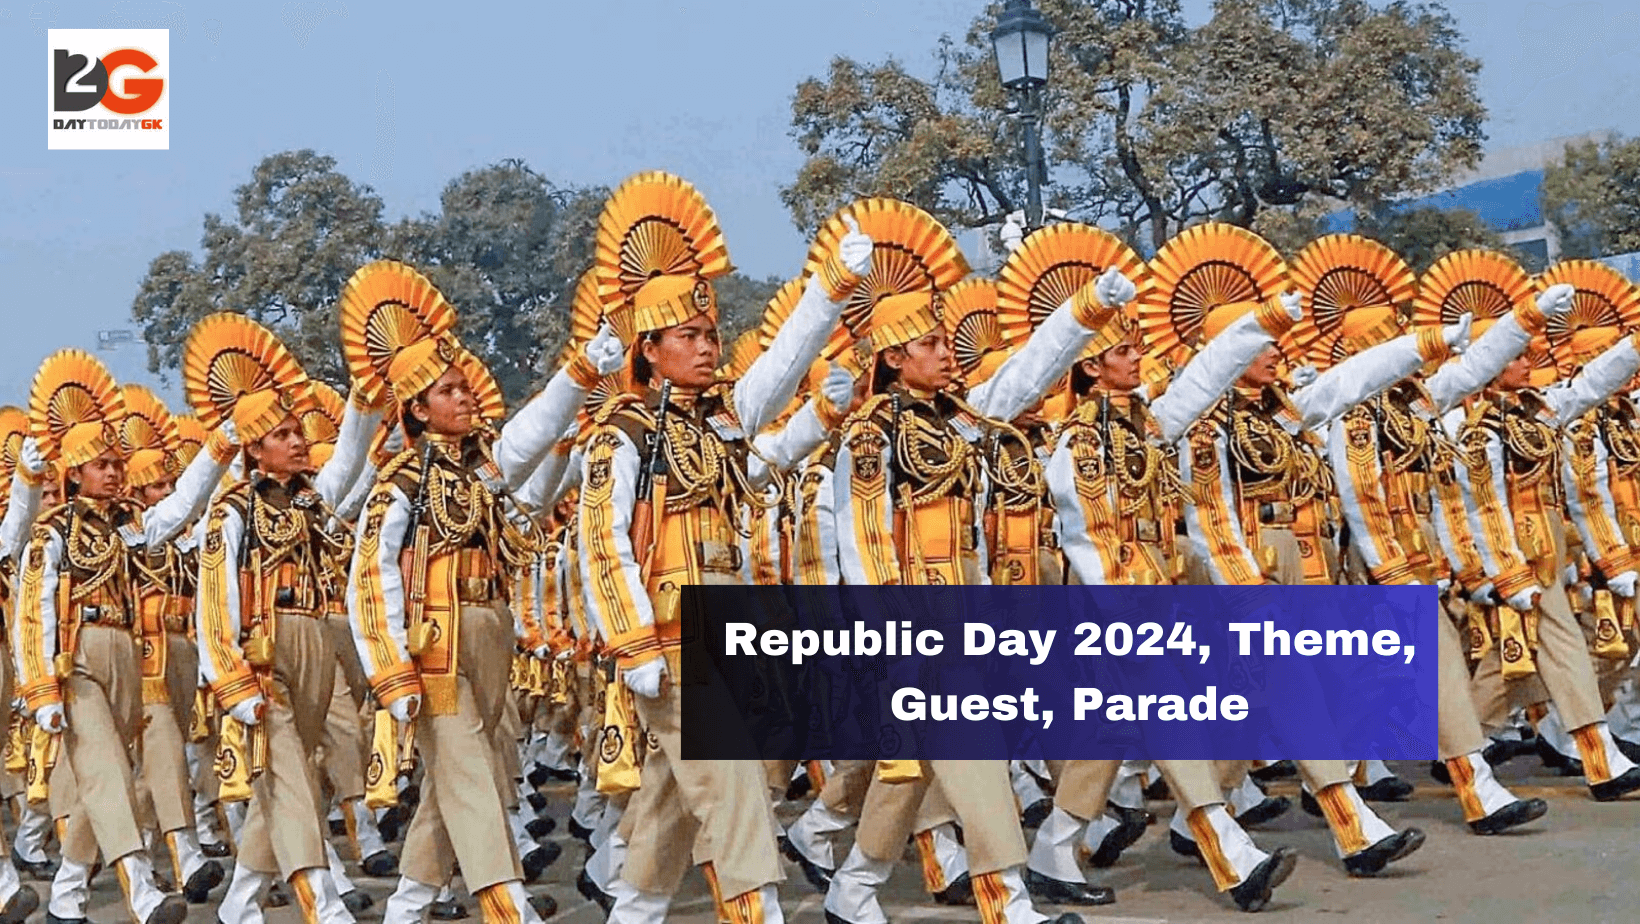 Republic Day 2024, Theme, Guest, Parade